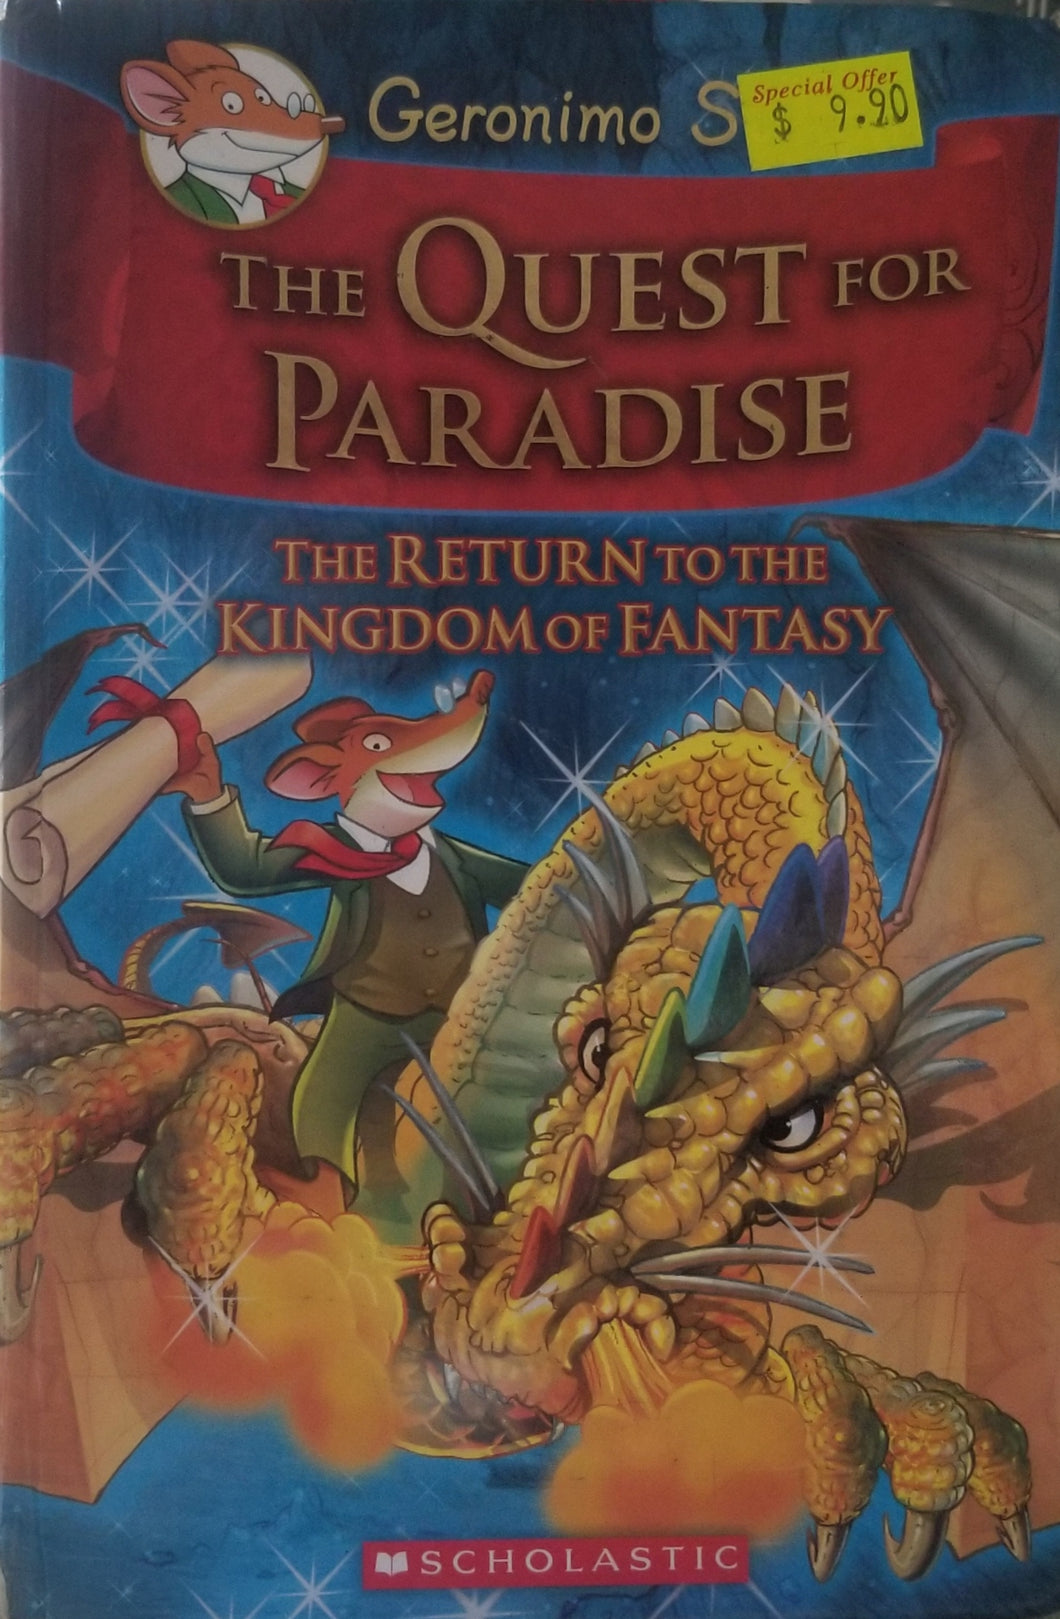 Geronimo Stilton and the Kingdom of Fantasy: (Book2) Quest for Paradise